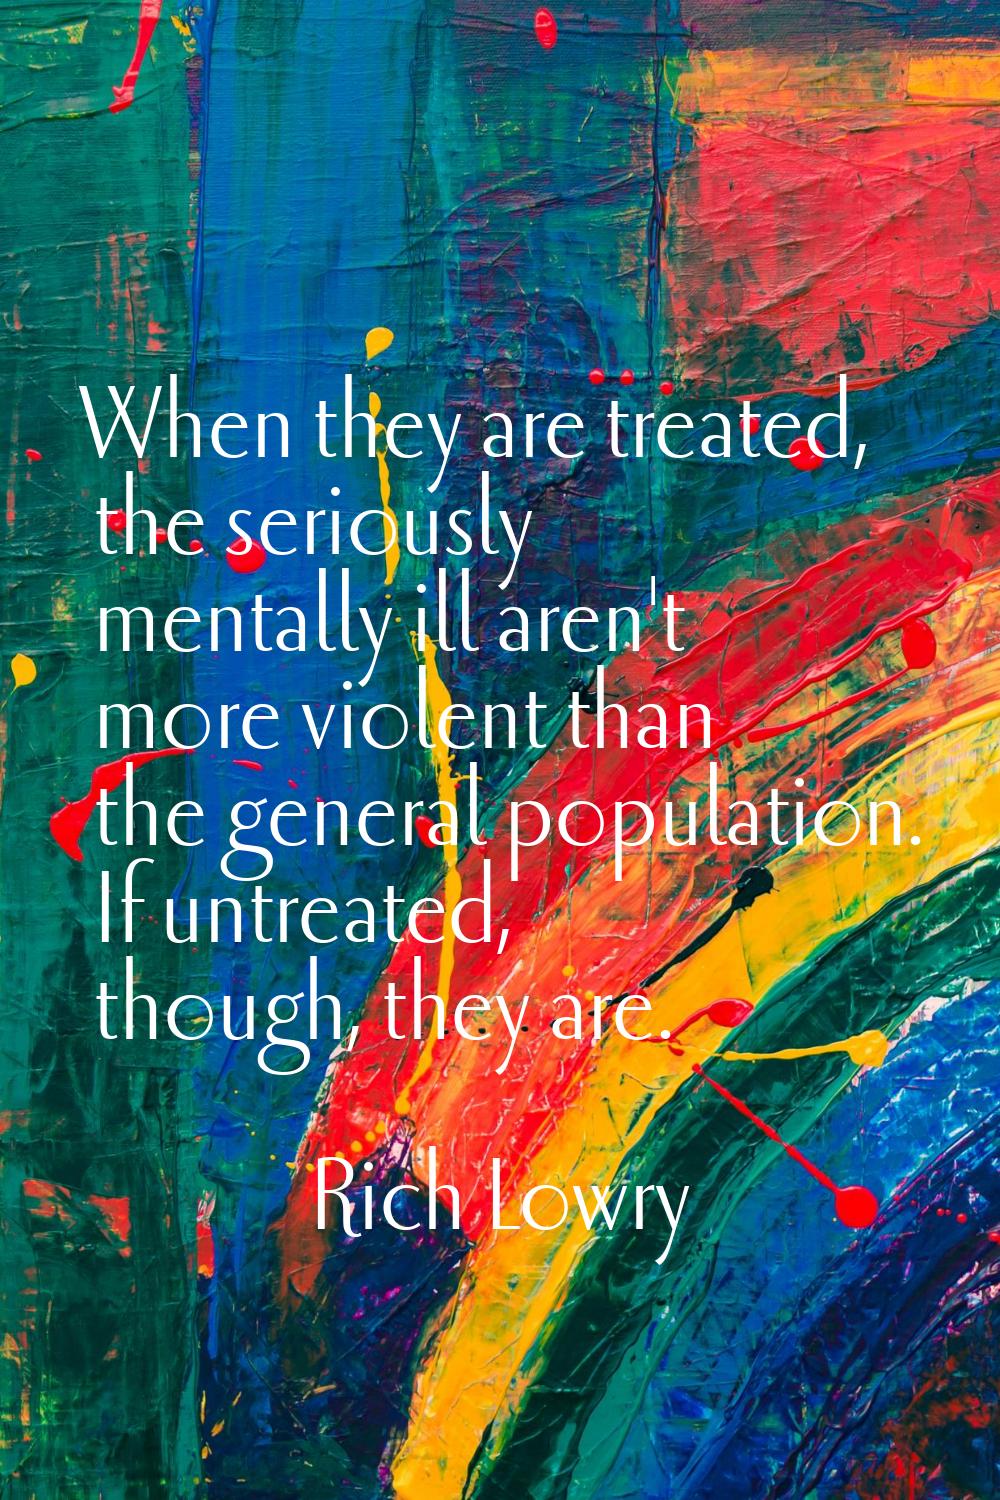 When they are treated, the seriously mentally ill aren't more violent than the general population. 